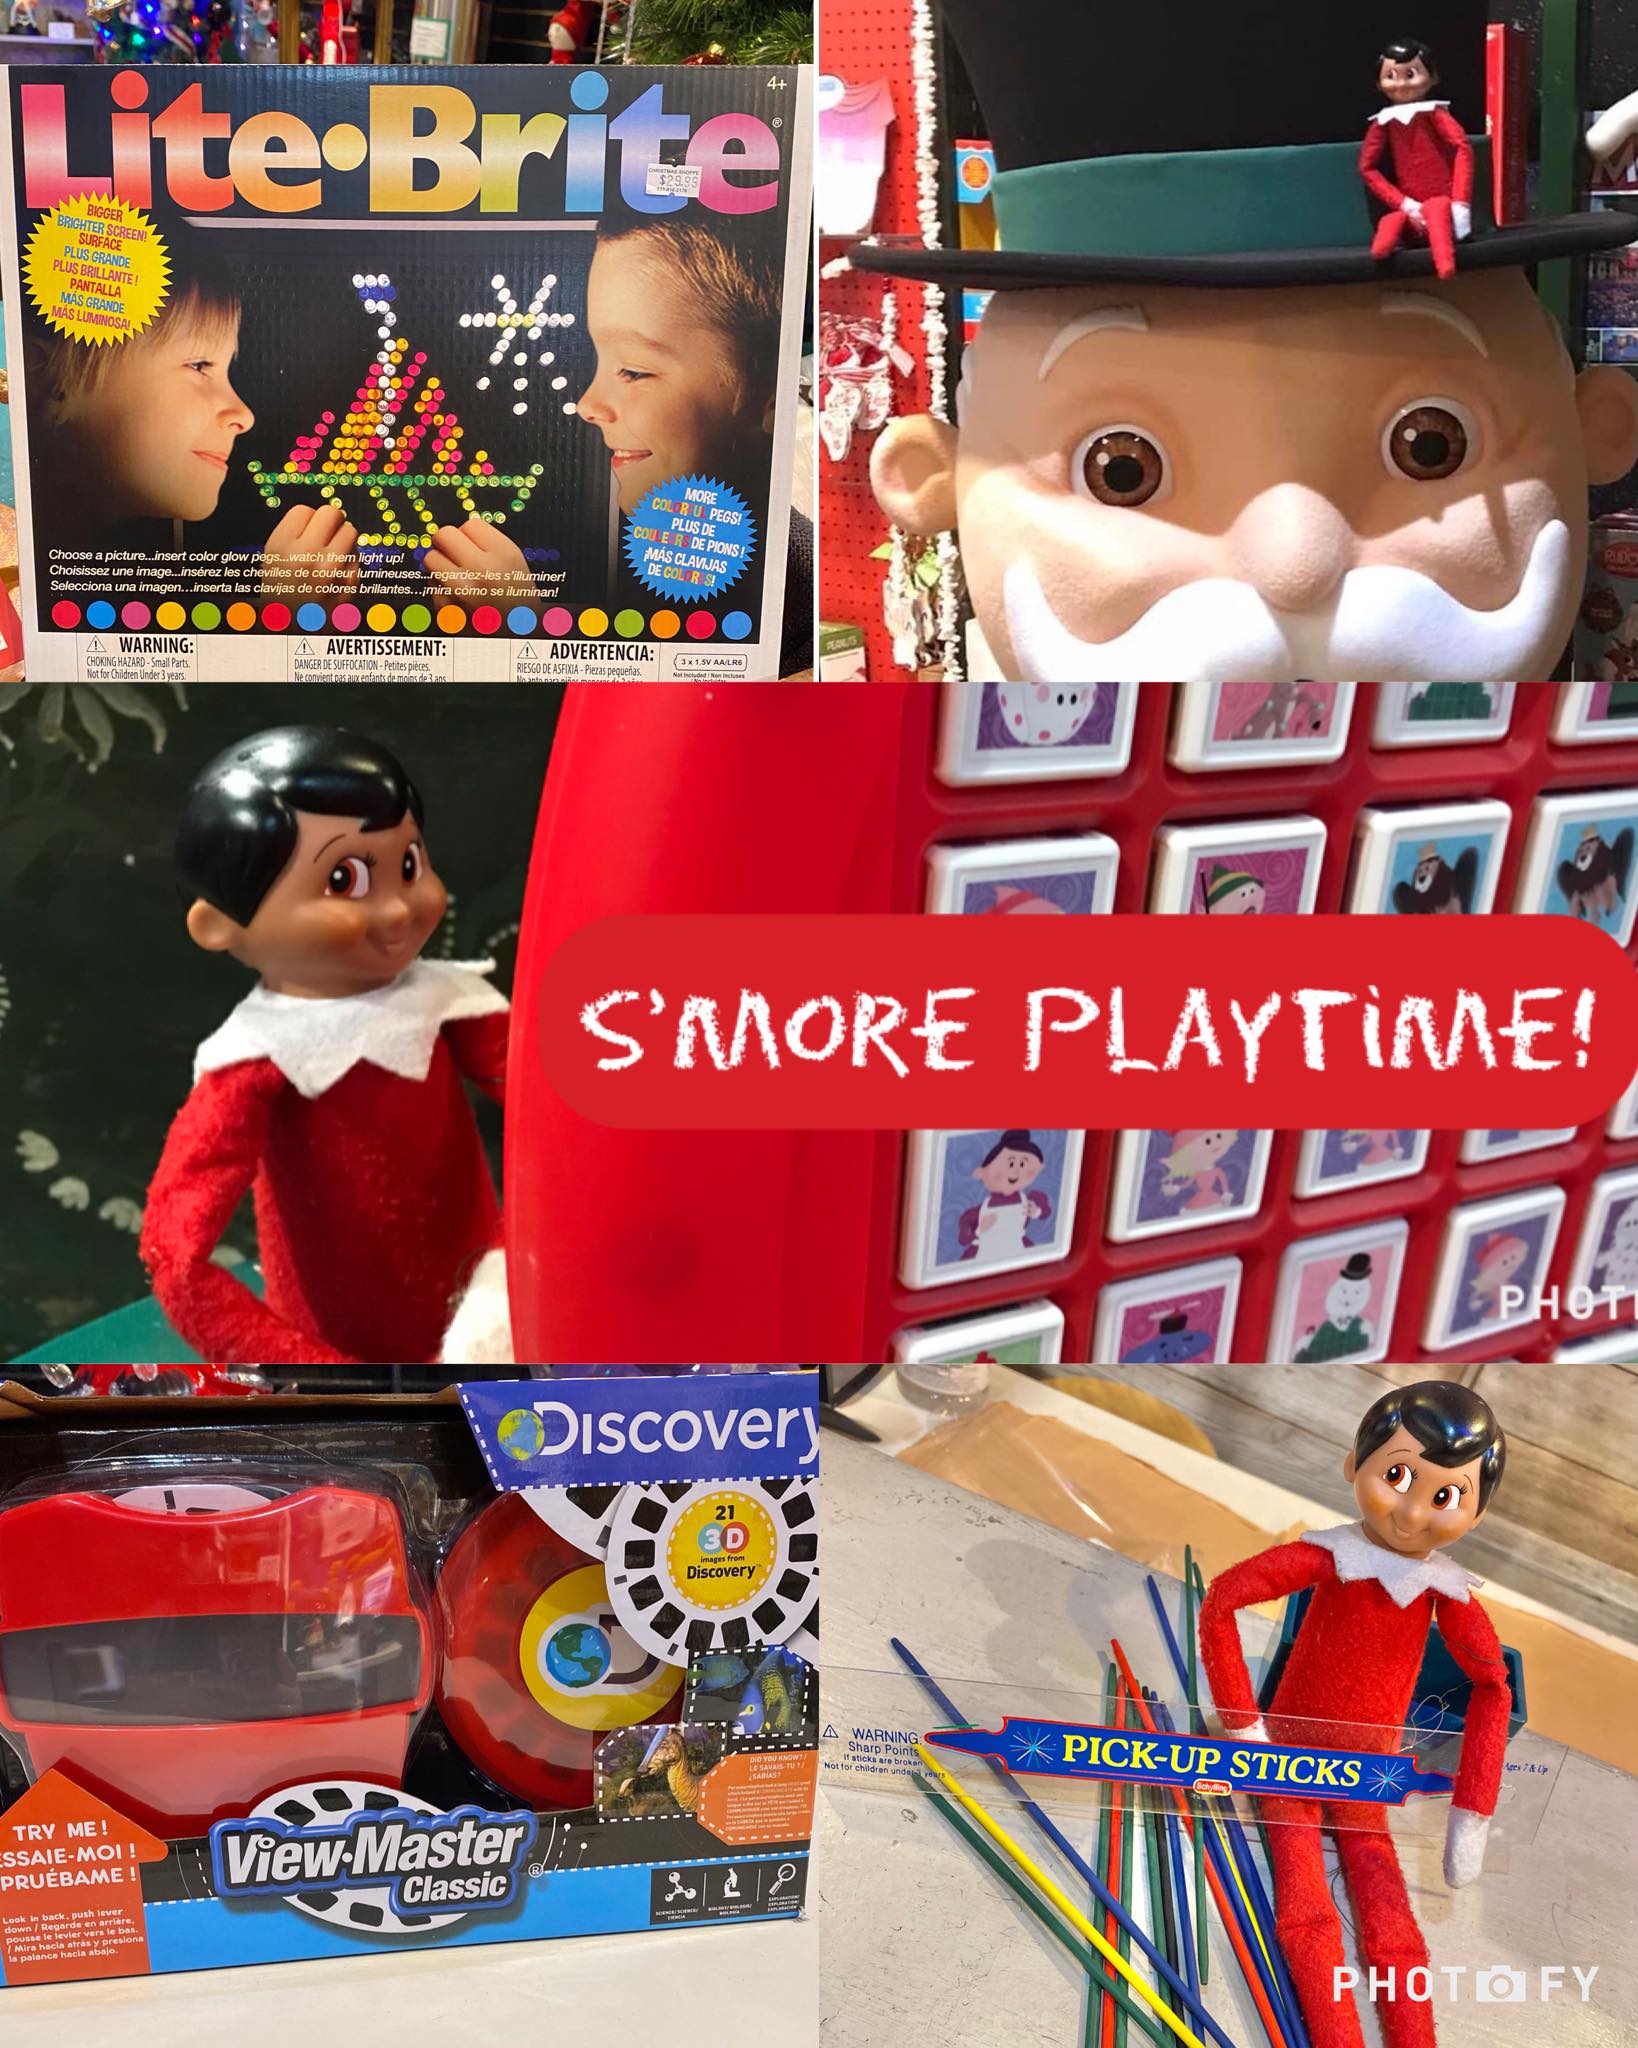 S'more Playtime - The Christmas Shoppe